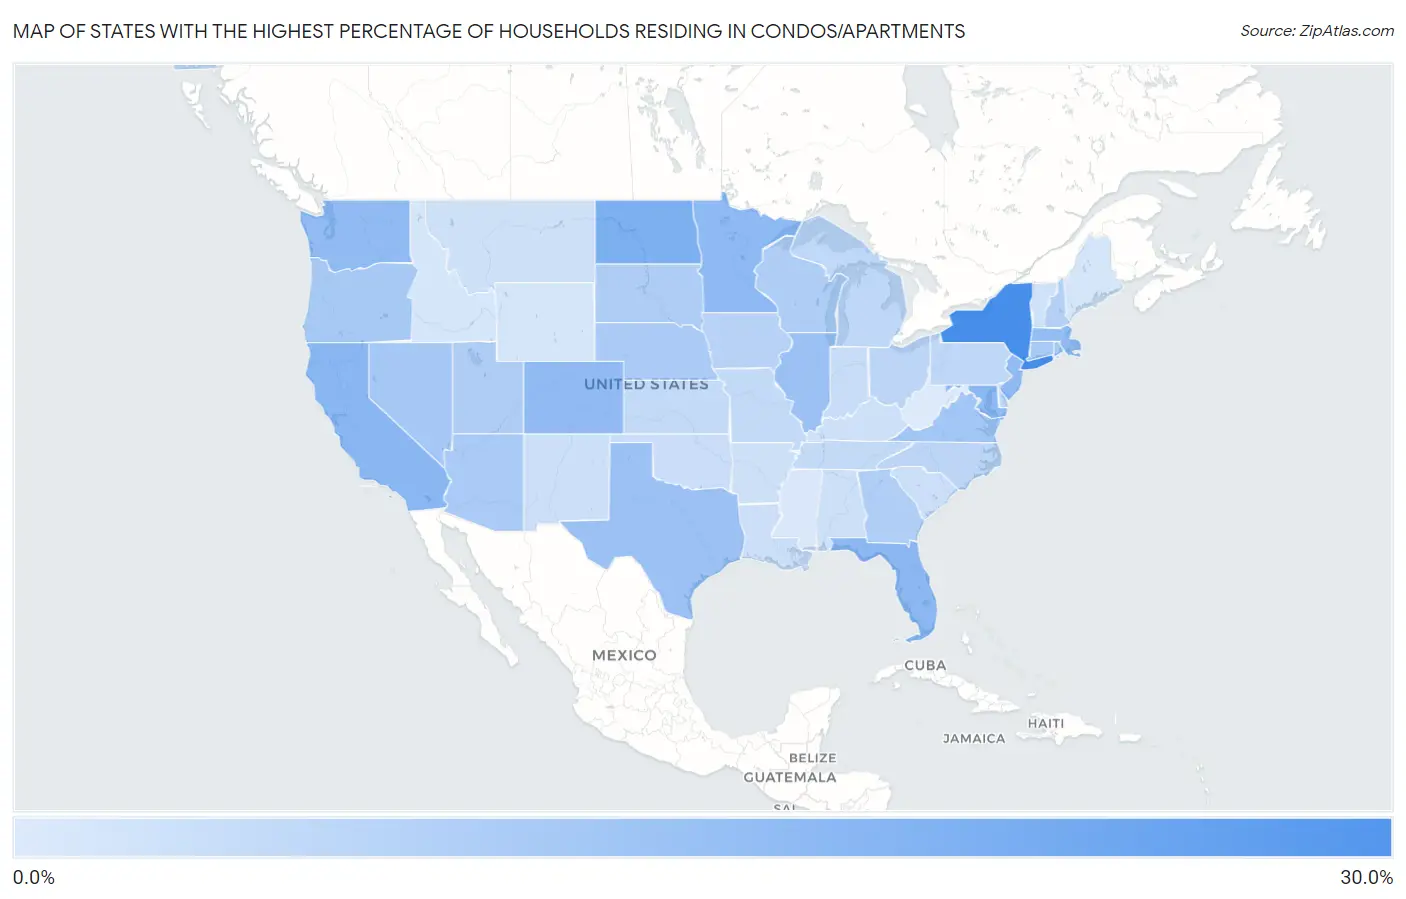 States with the Highest Percentage of Households Residing in Condos/Apartments in the United States Map